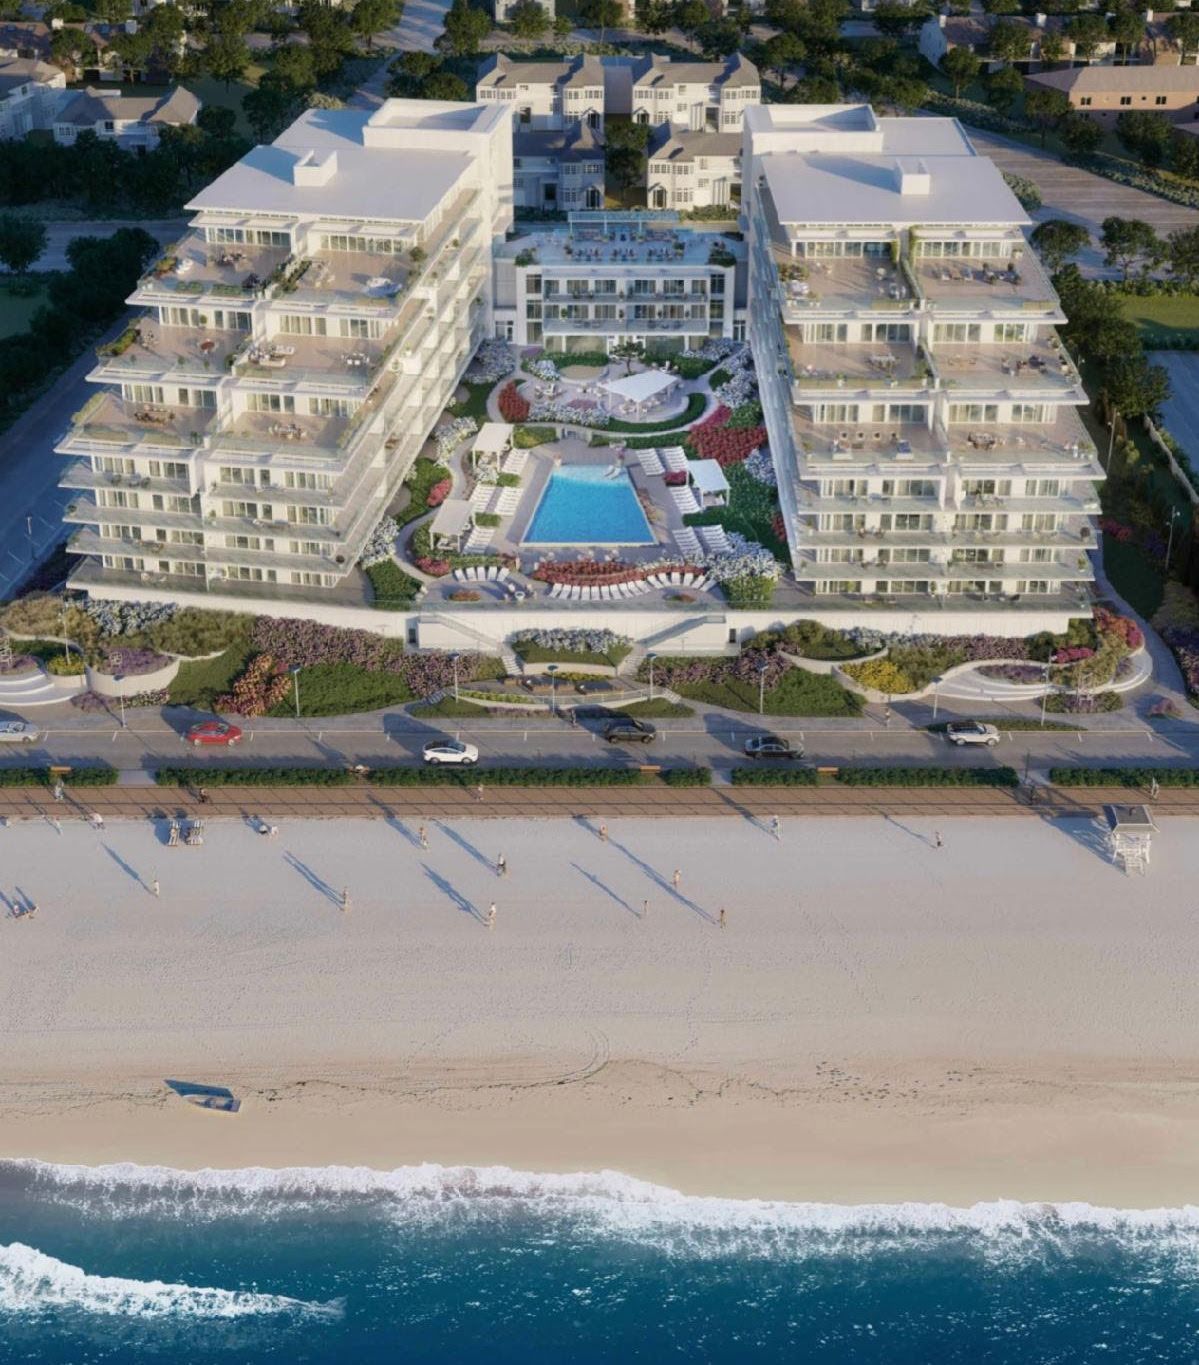 Long Branch NJ Seaview Towers site proposed for beachfront condos